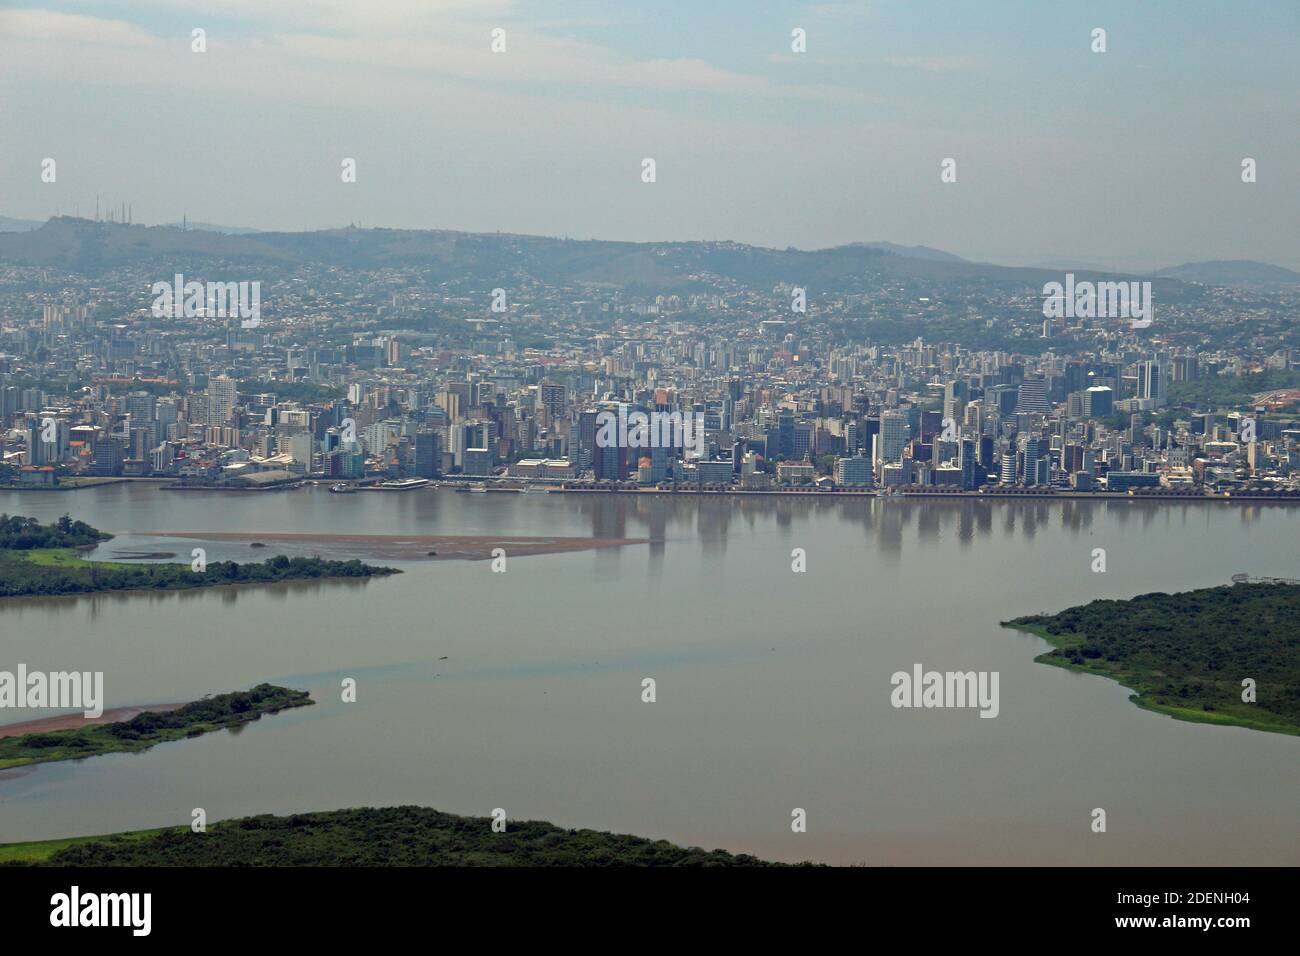 Aerial view of the southern region of the capital of the state of Rio Grande do Sul, Porto Alegre, in southern Brazil. Stock Photo